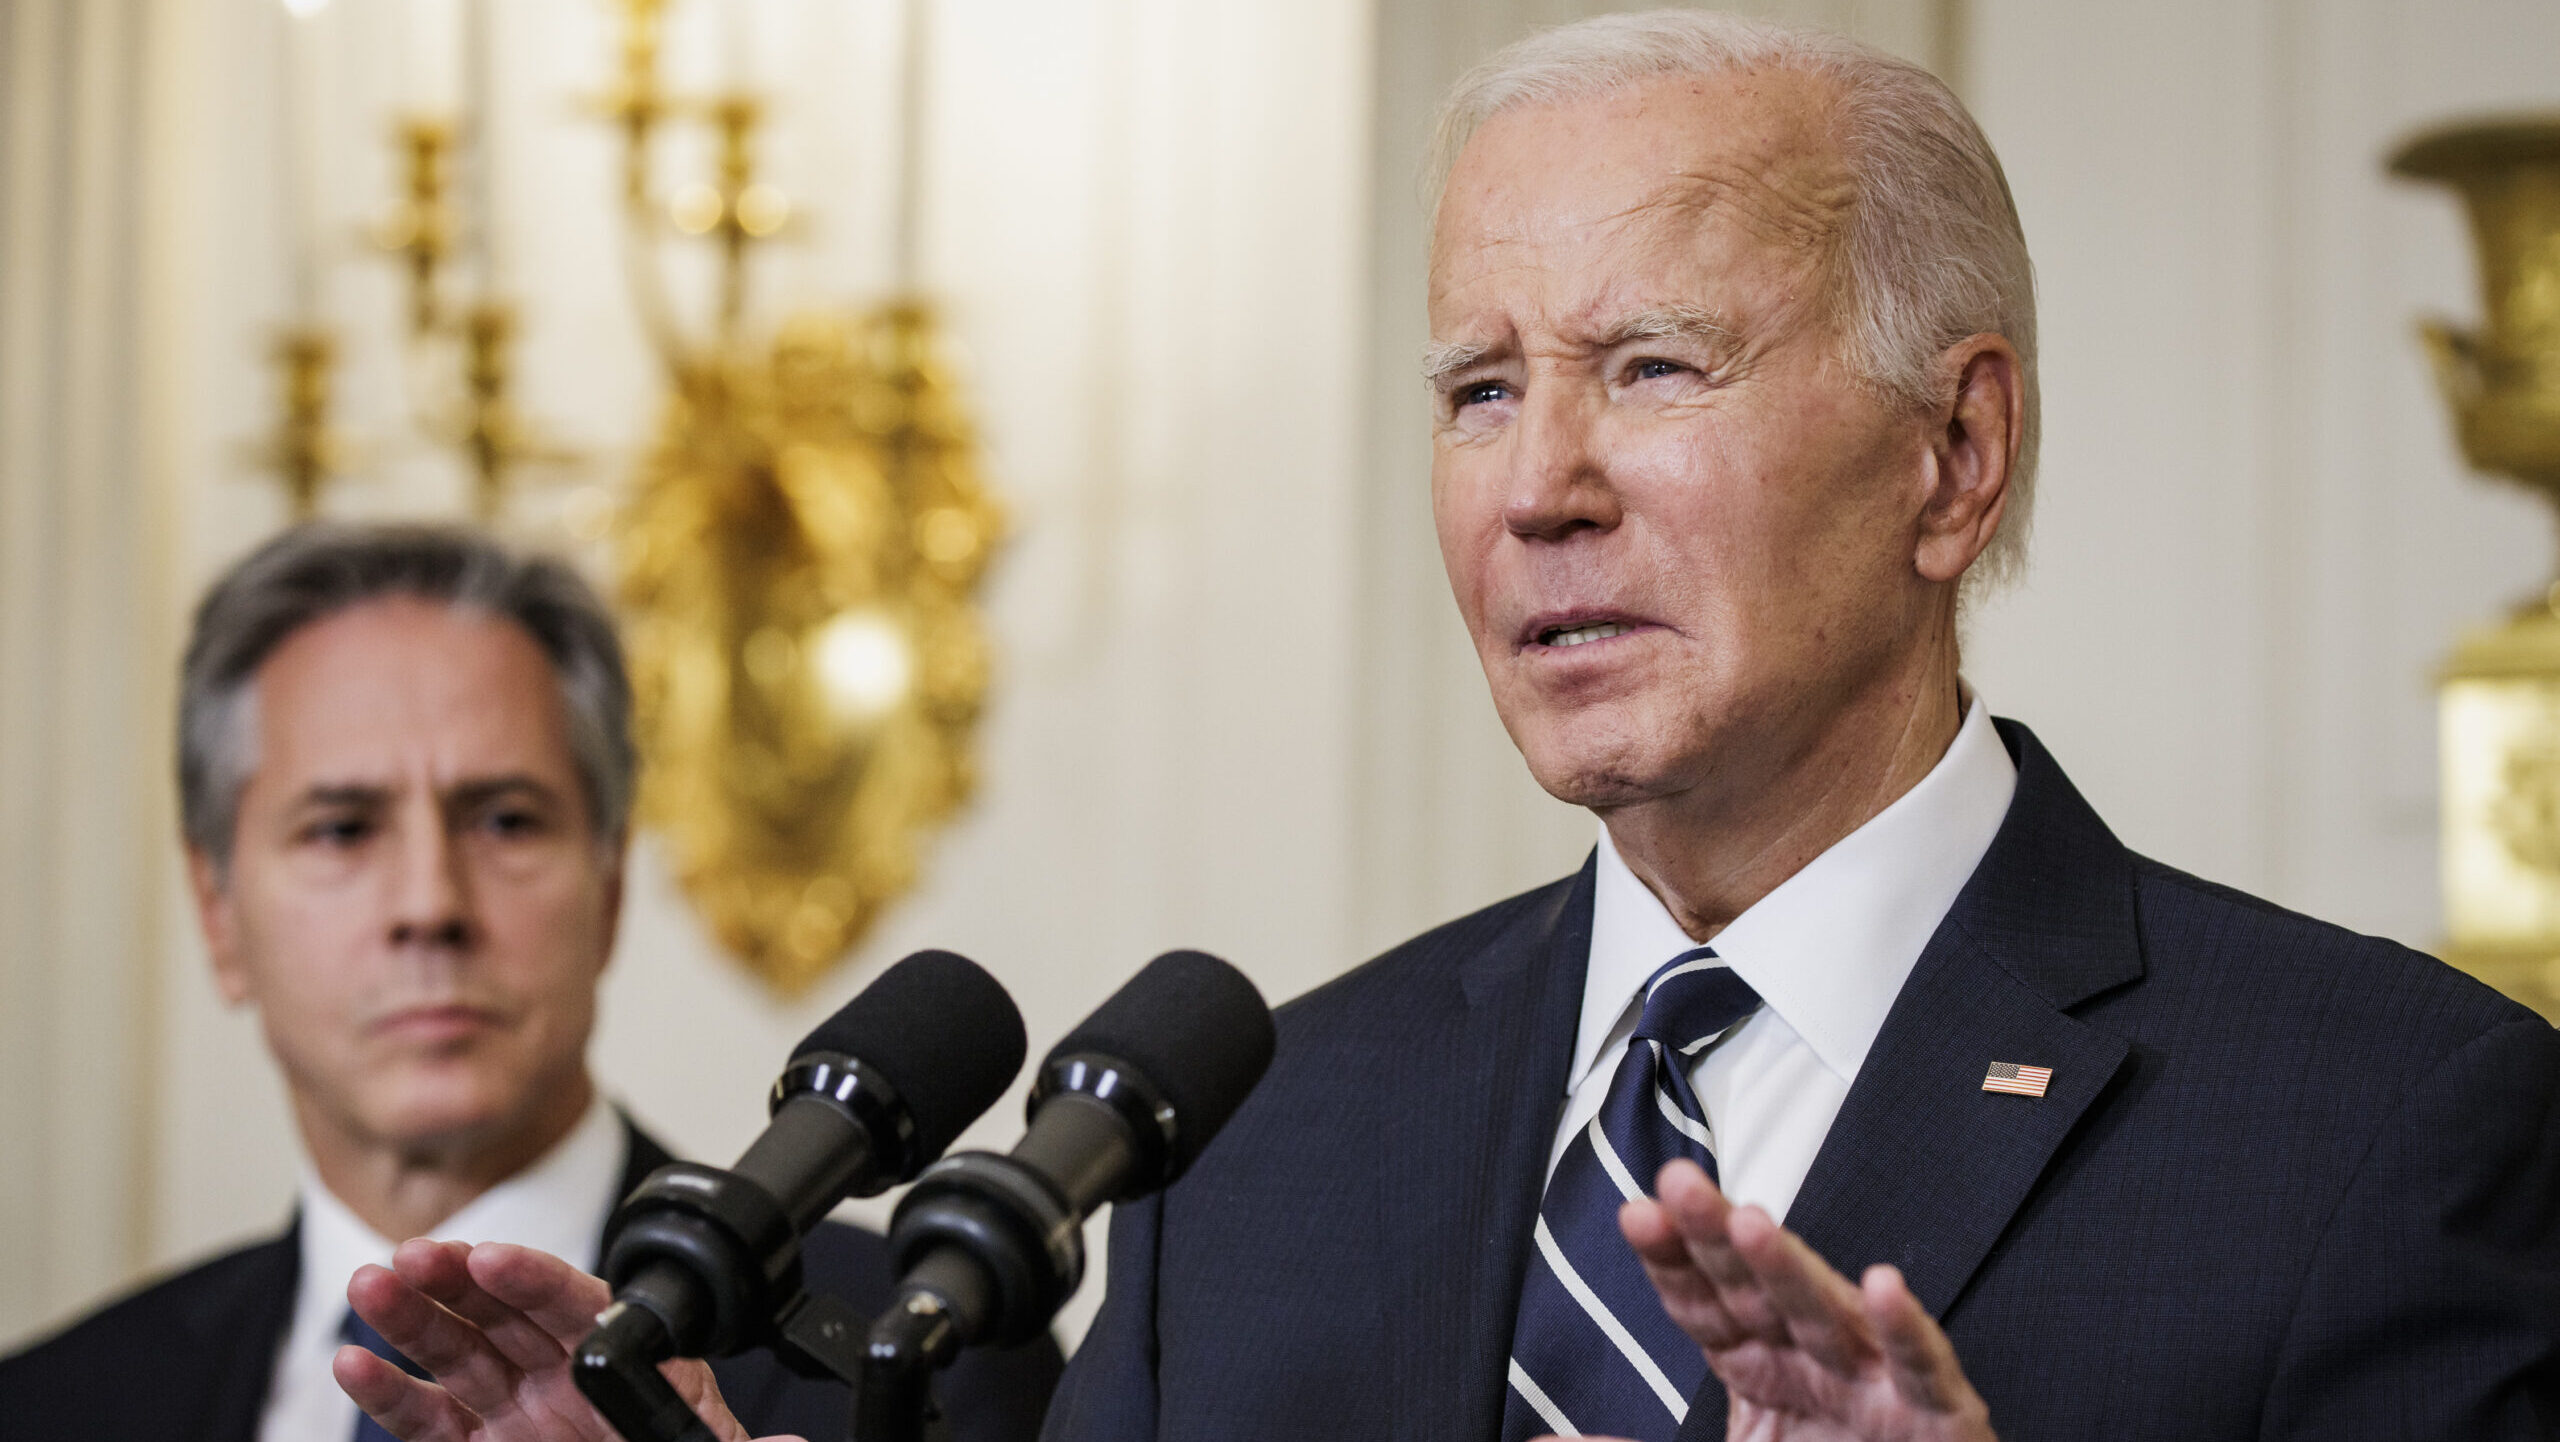 Biden’s Approach to Middle East Markedly Different From Trump’s, Experts Say